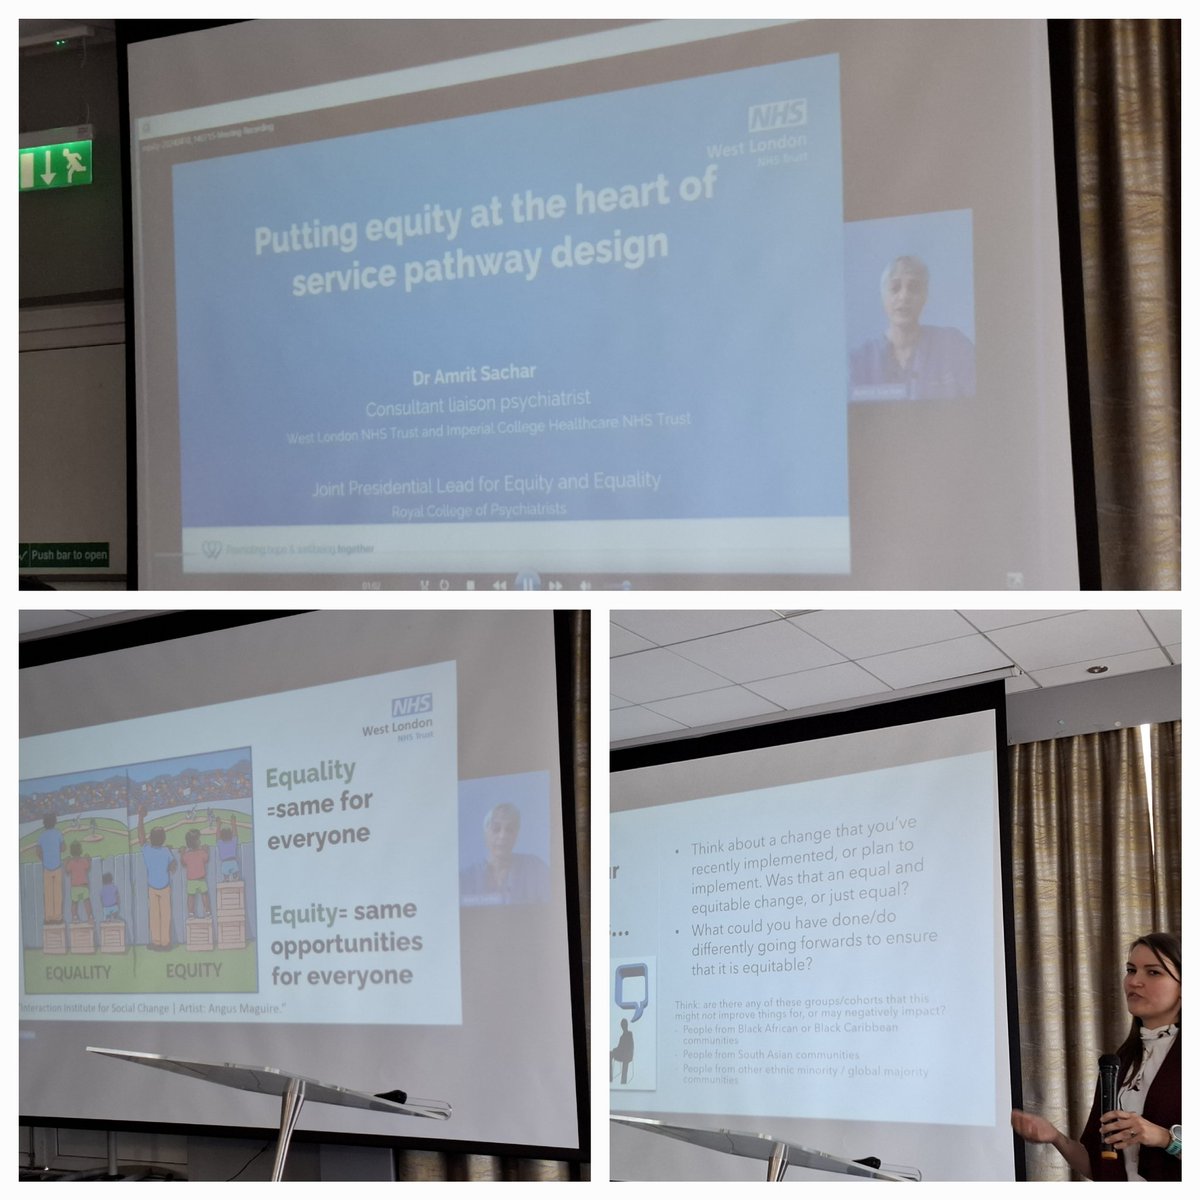 @apksachar & Lexi Ireland talked about #HealthEquity in their presentation 'Putting Equity at the Heart of Service Pathway Design' @rcpsych #Movement4Improvement #M4I24